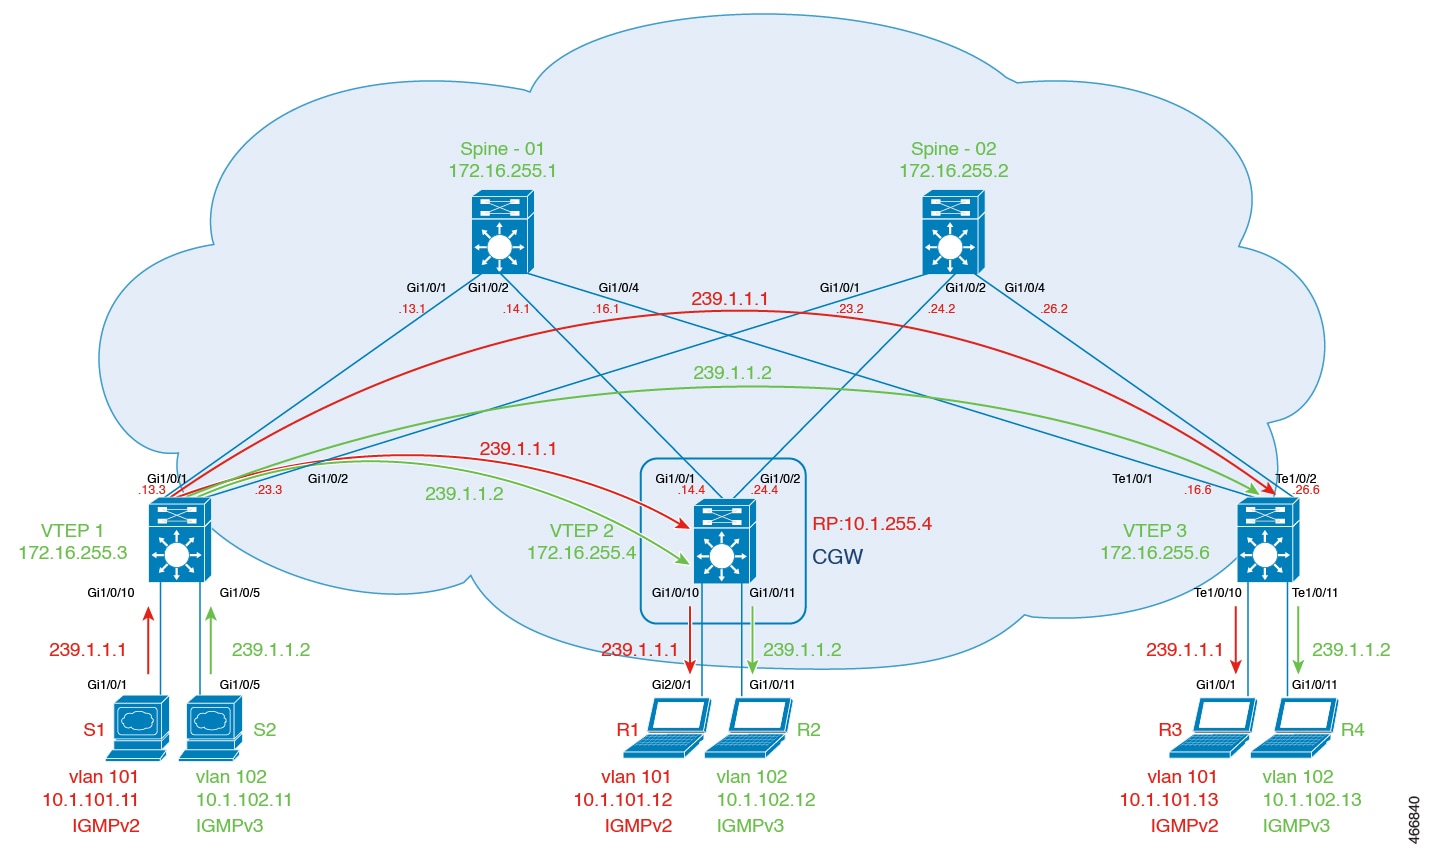 BGP EVPN VXLAN  FabricTopology to show Ingress Replication with IGMP